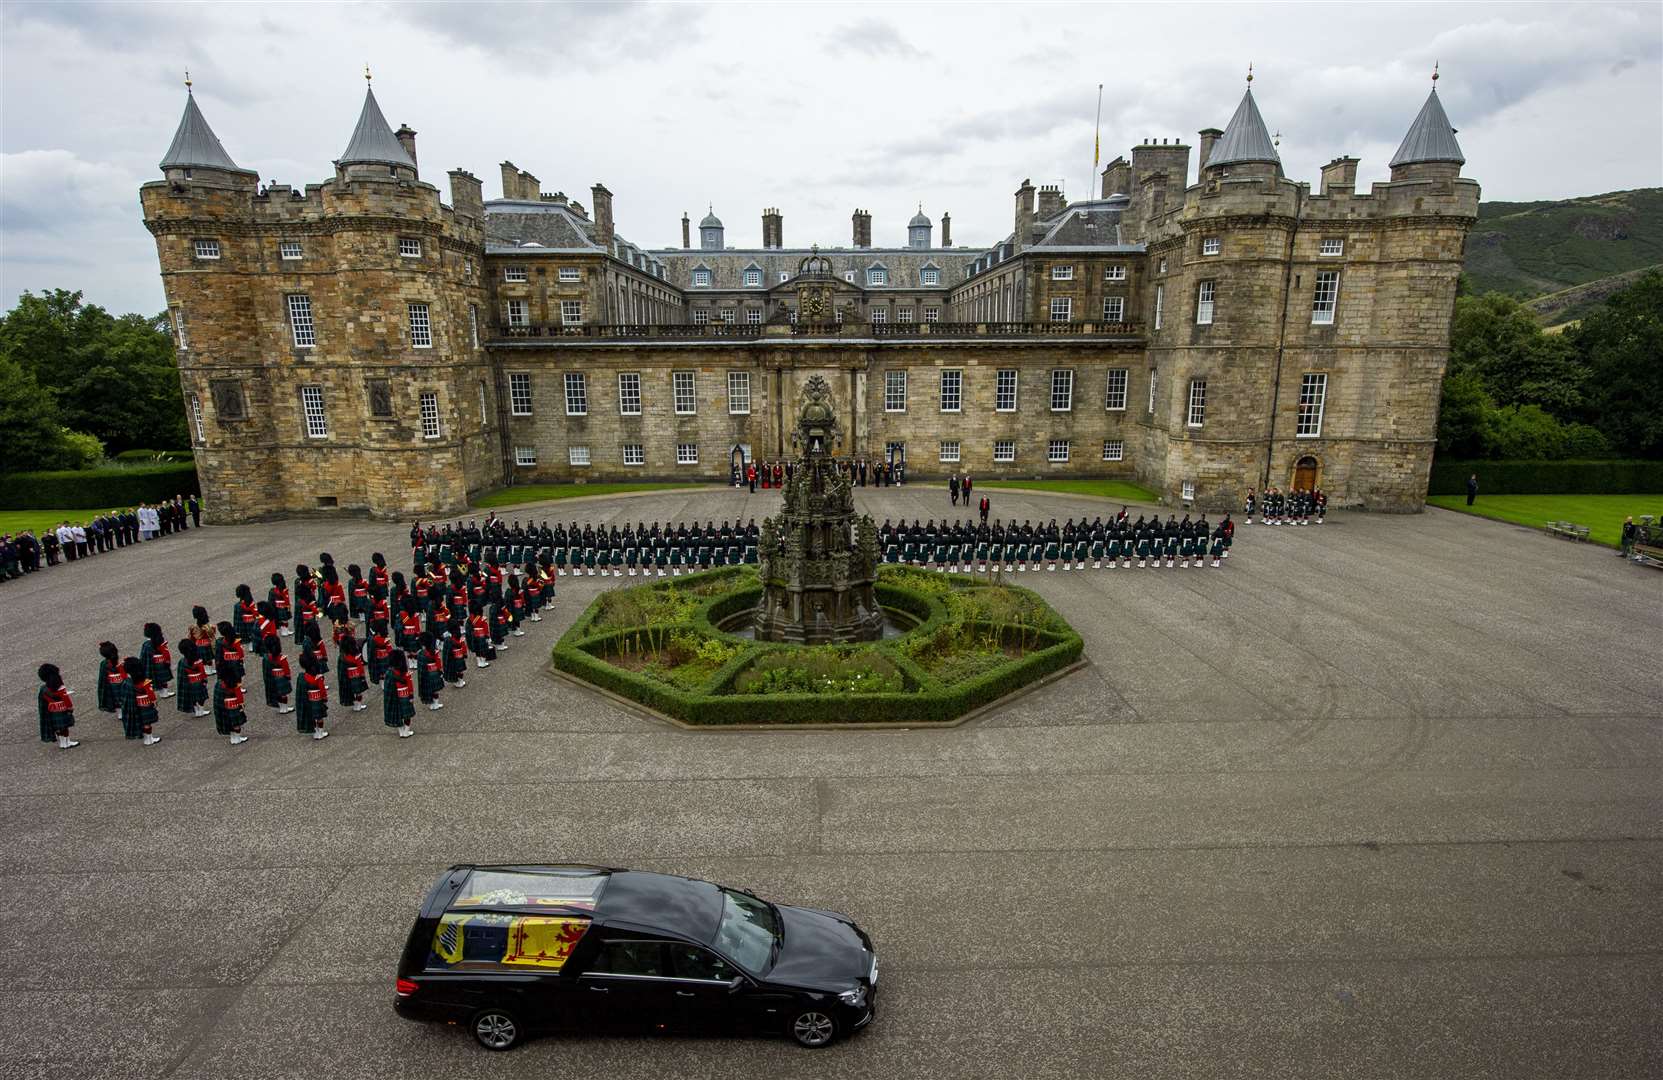 The hearse carrying the coffin arrived at the Palace of Holyroodhouse, Edinburgh, on Sunday after a six-hour journey from Balmoral (PA)